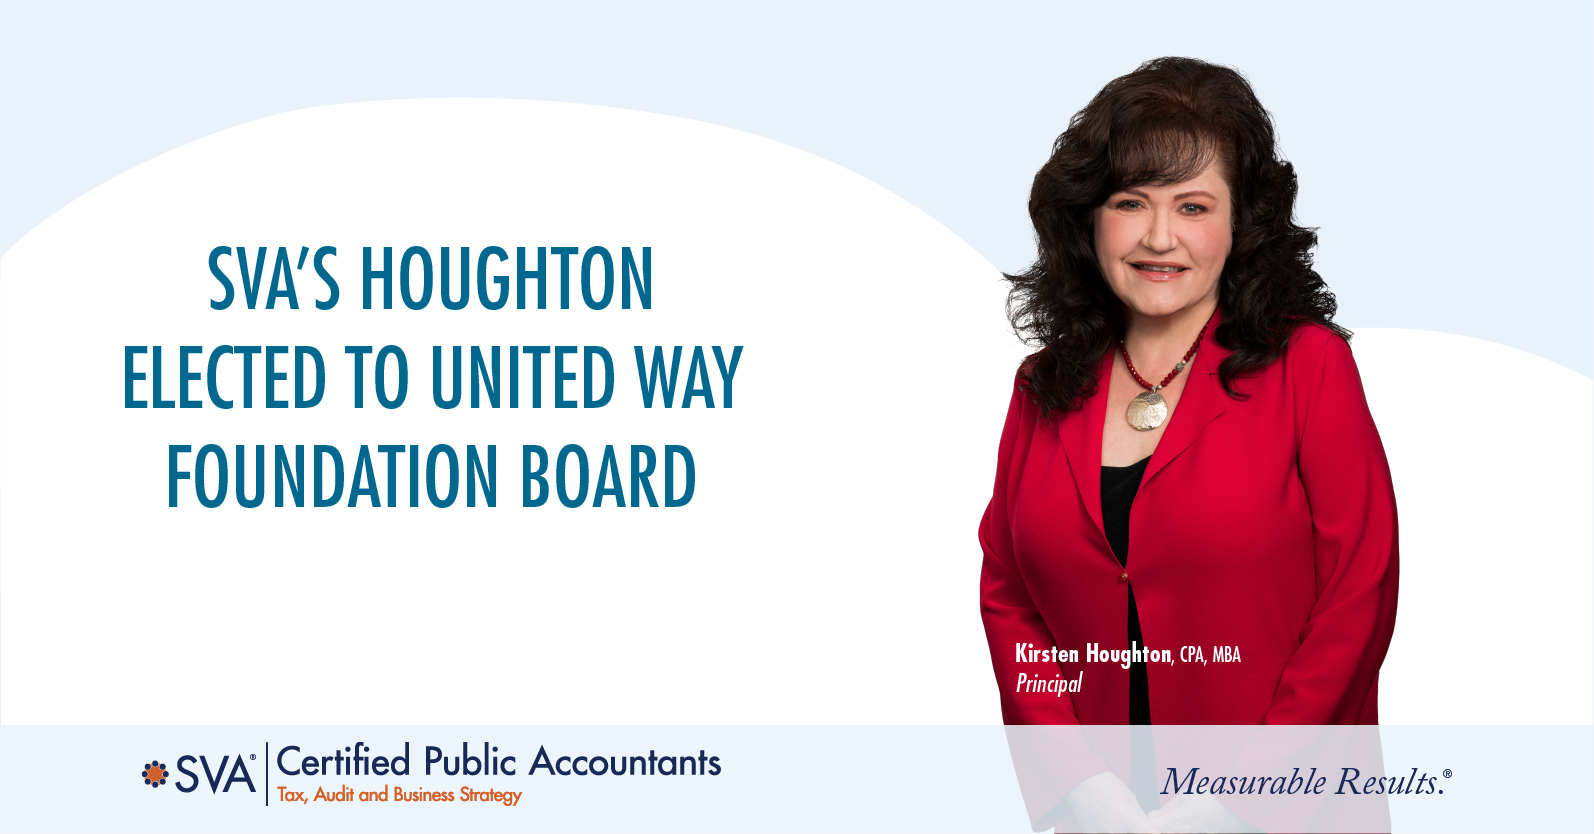 Kirsten Houghton Elected to United Way Foundation Board